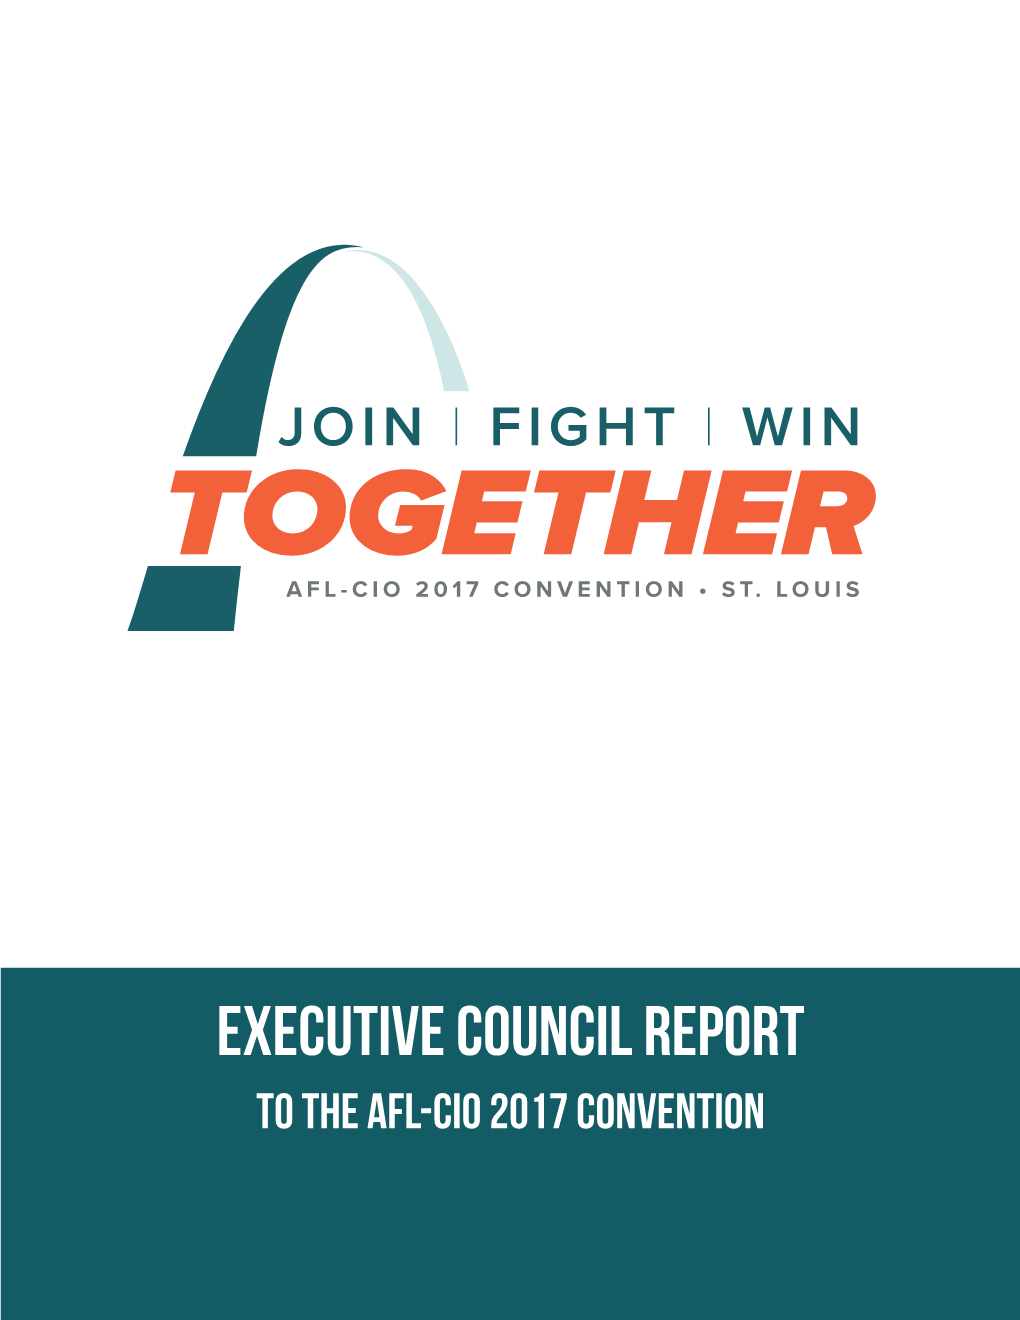 Executive Council Report to the AFL-CIO 2017 Convention Contents